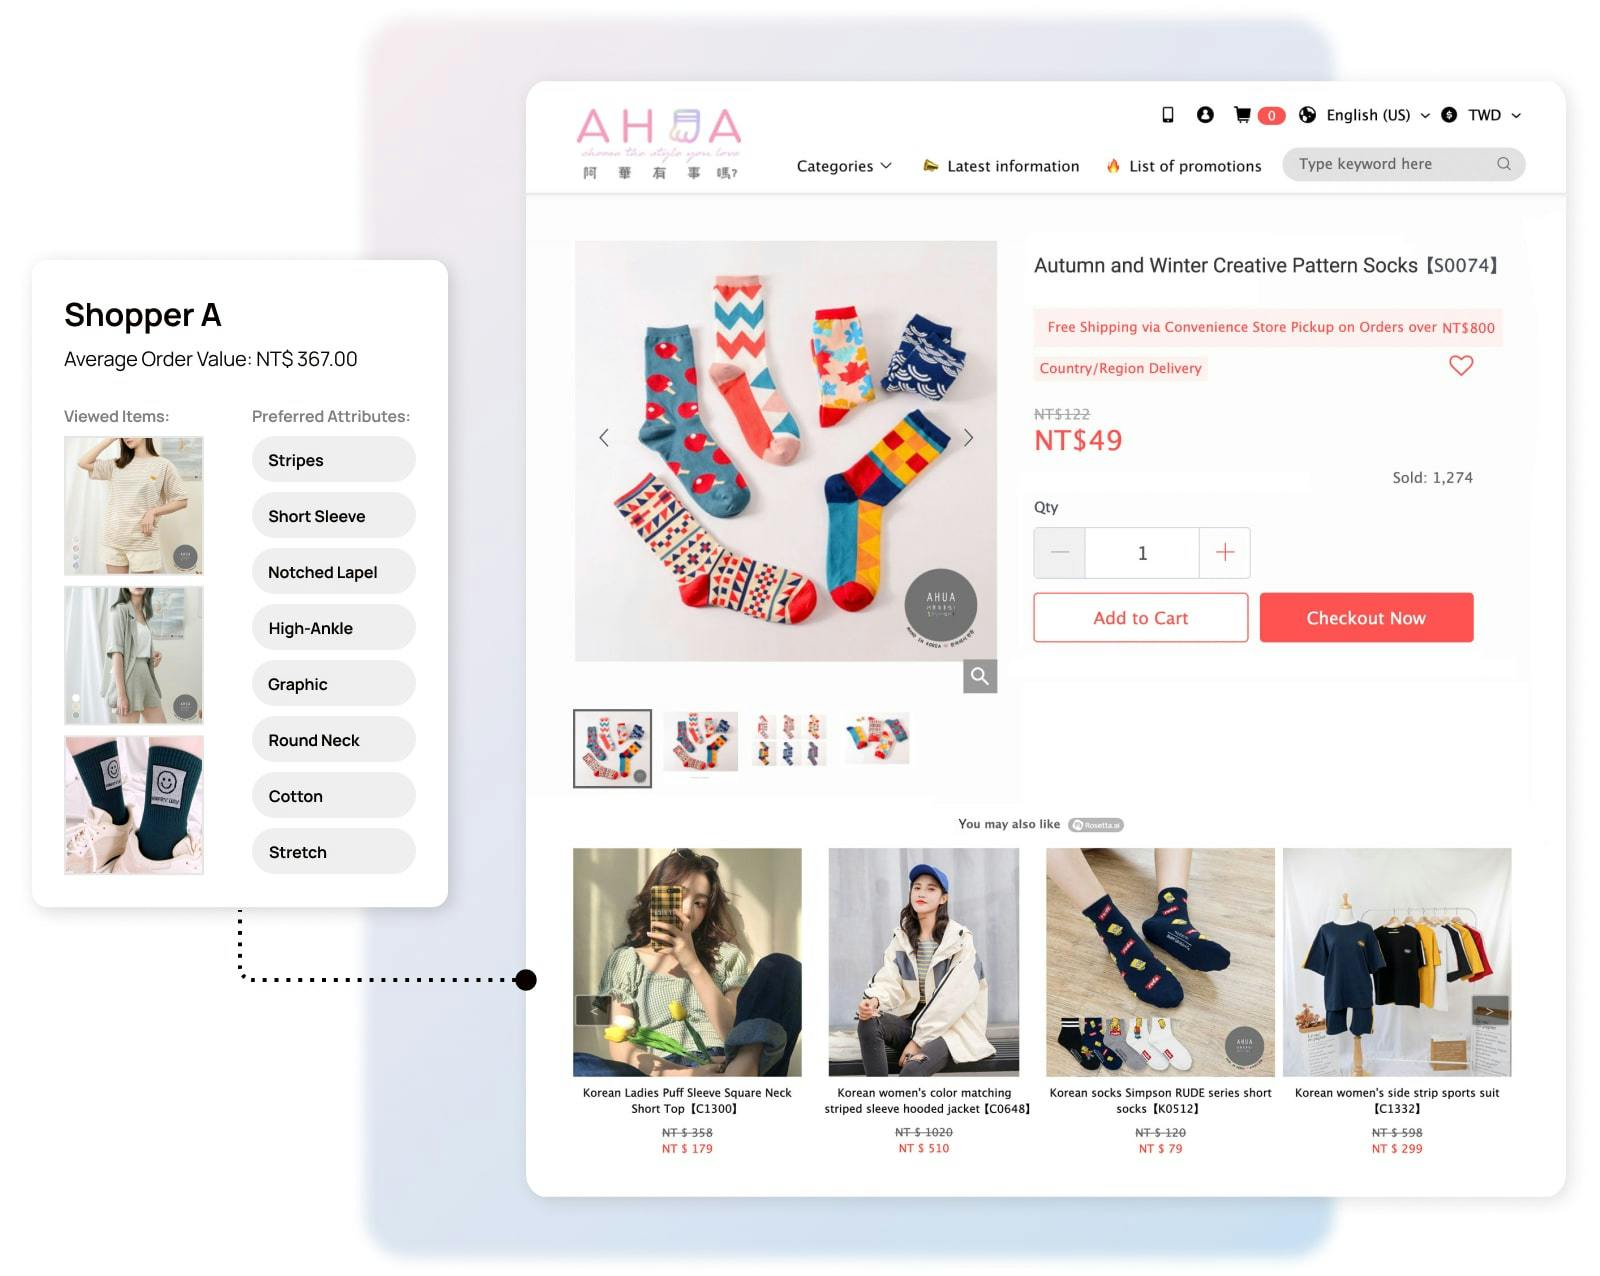 Rosetta AI personalized marketing solution collects customer/product data for AHUA